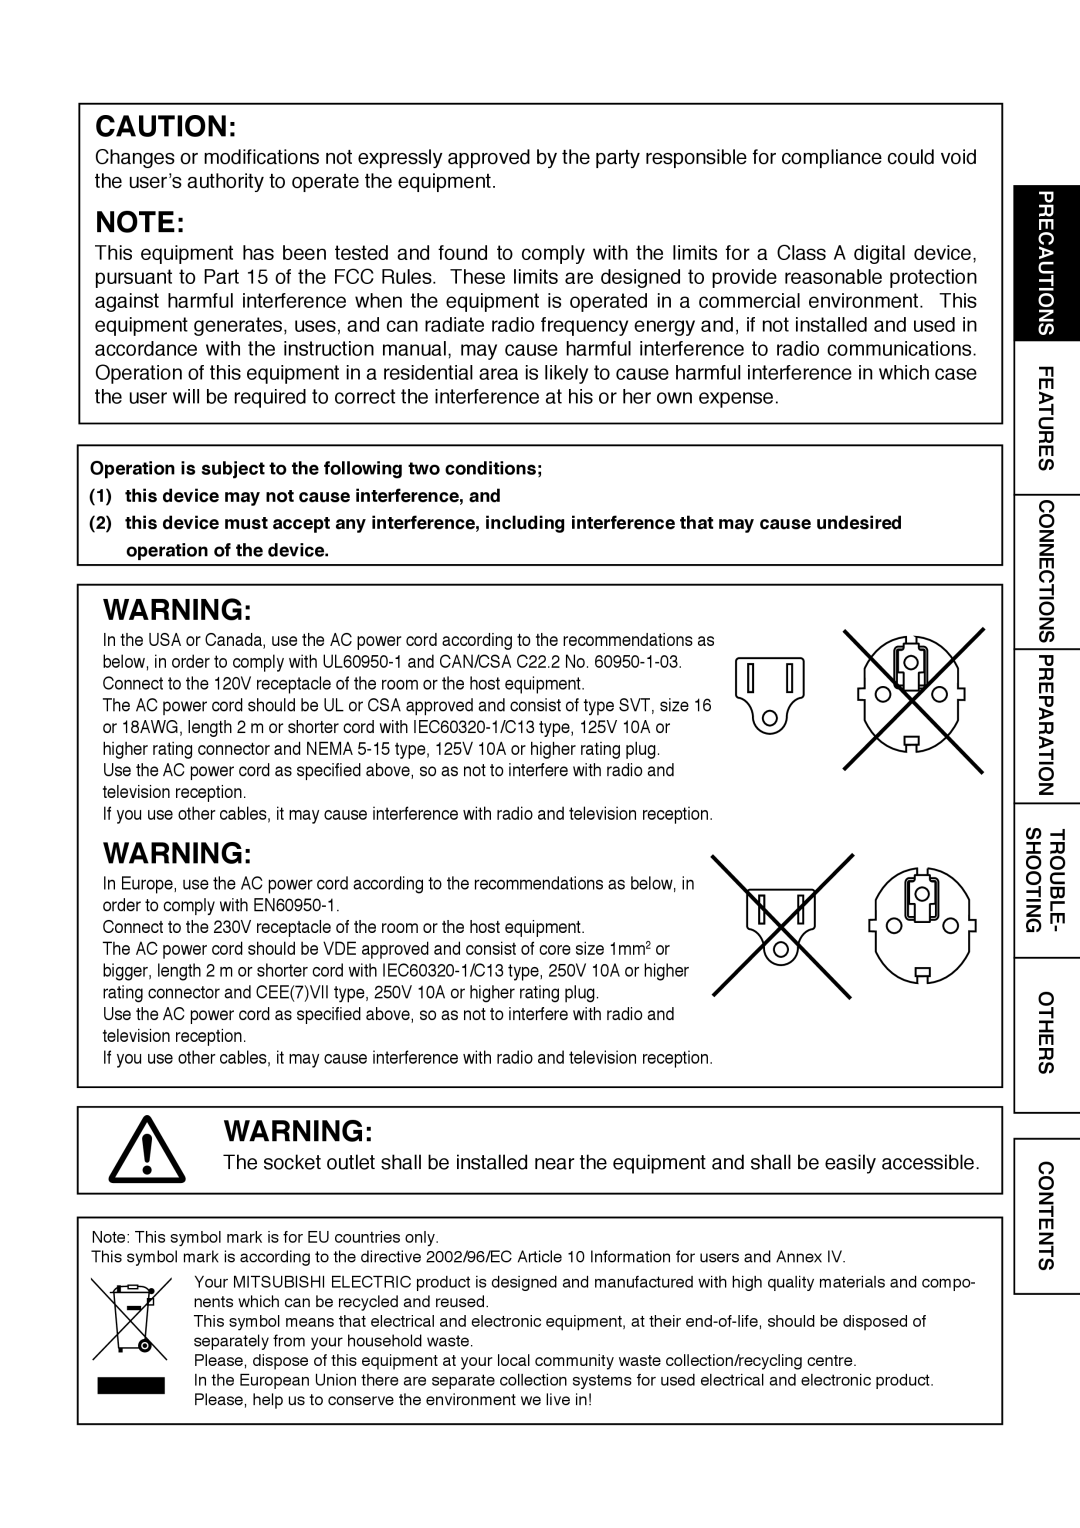 Mitsubishi Electronics CP9800DW operation manual Contents, Operation is subject to the following two conditions 